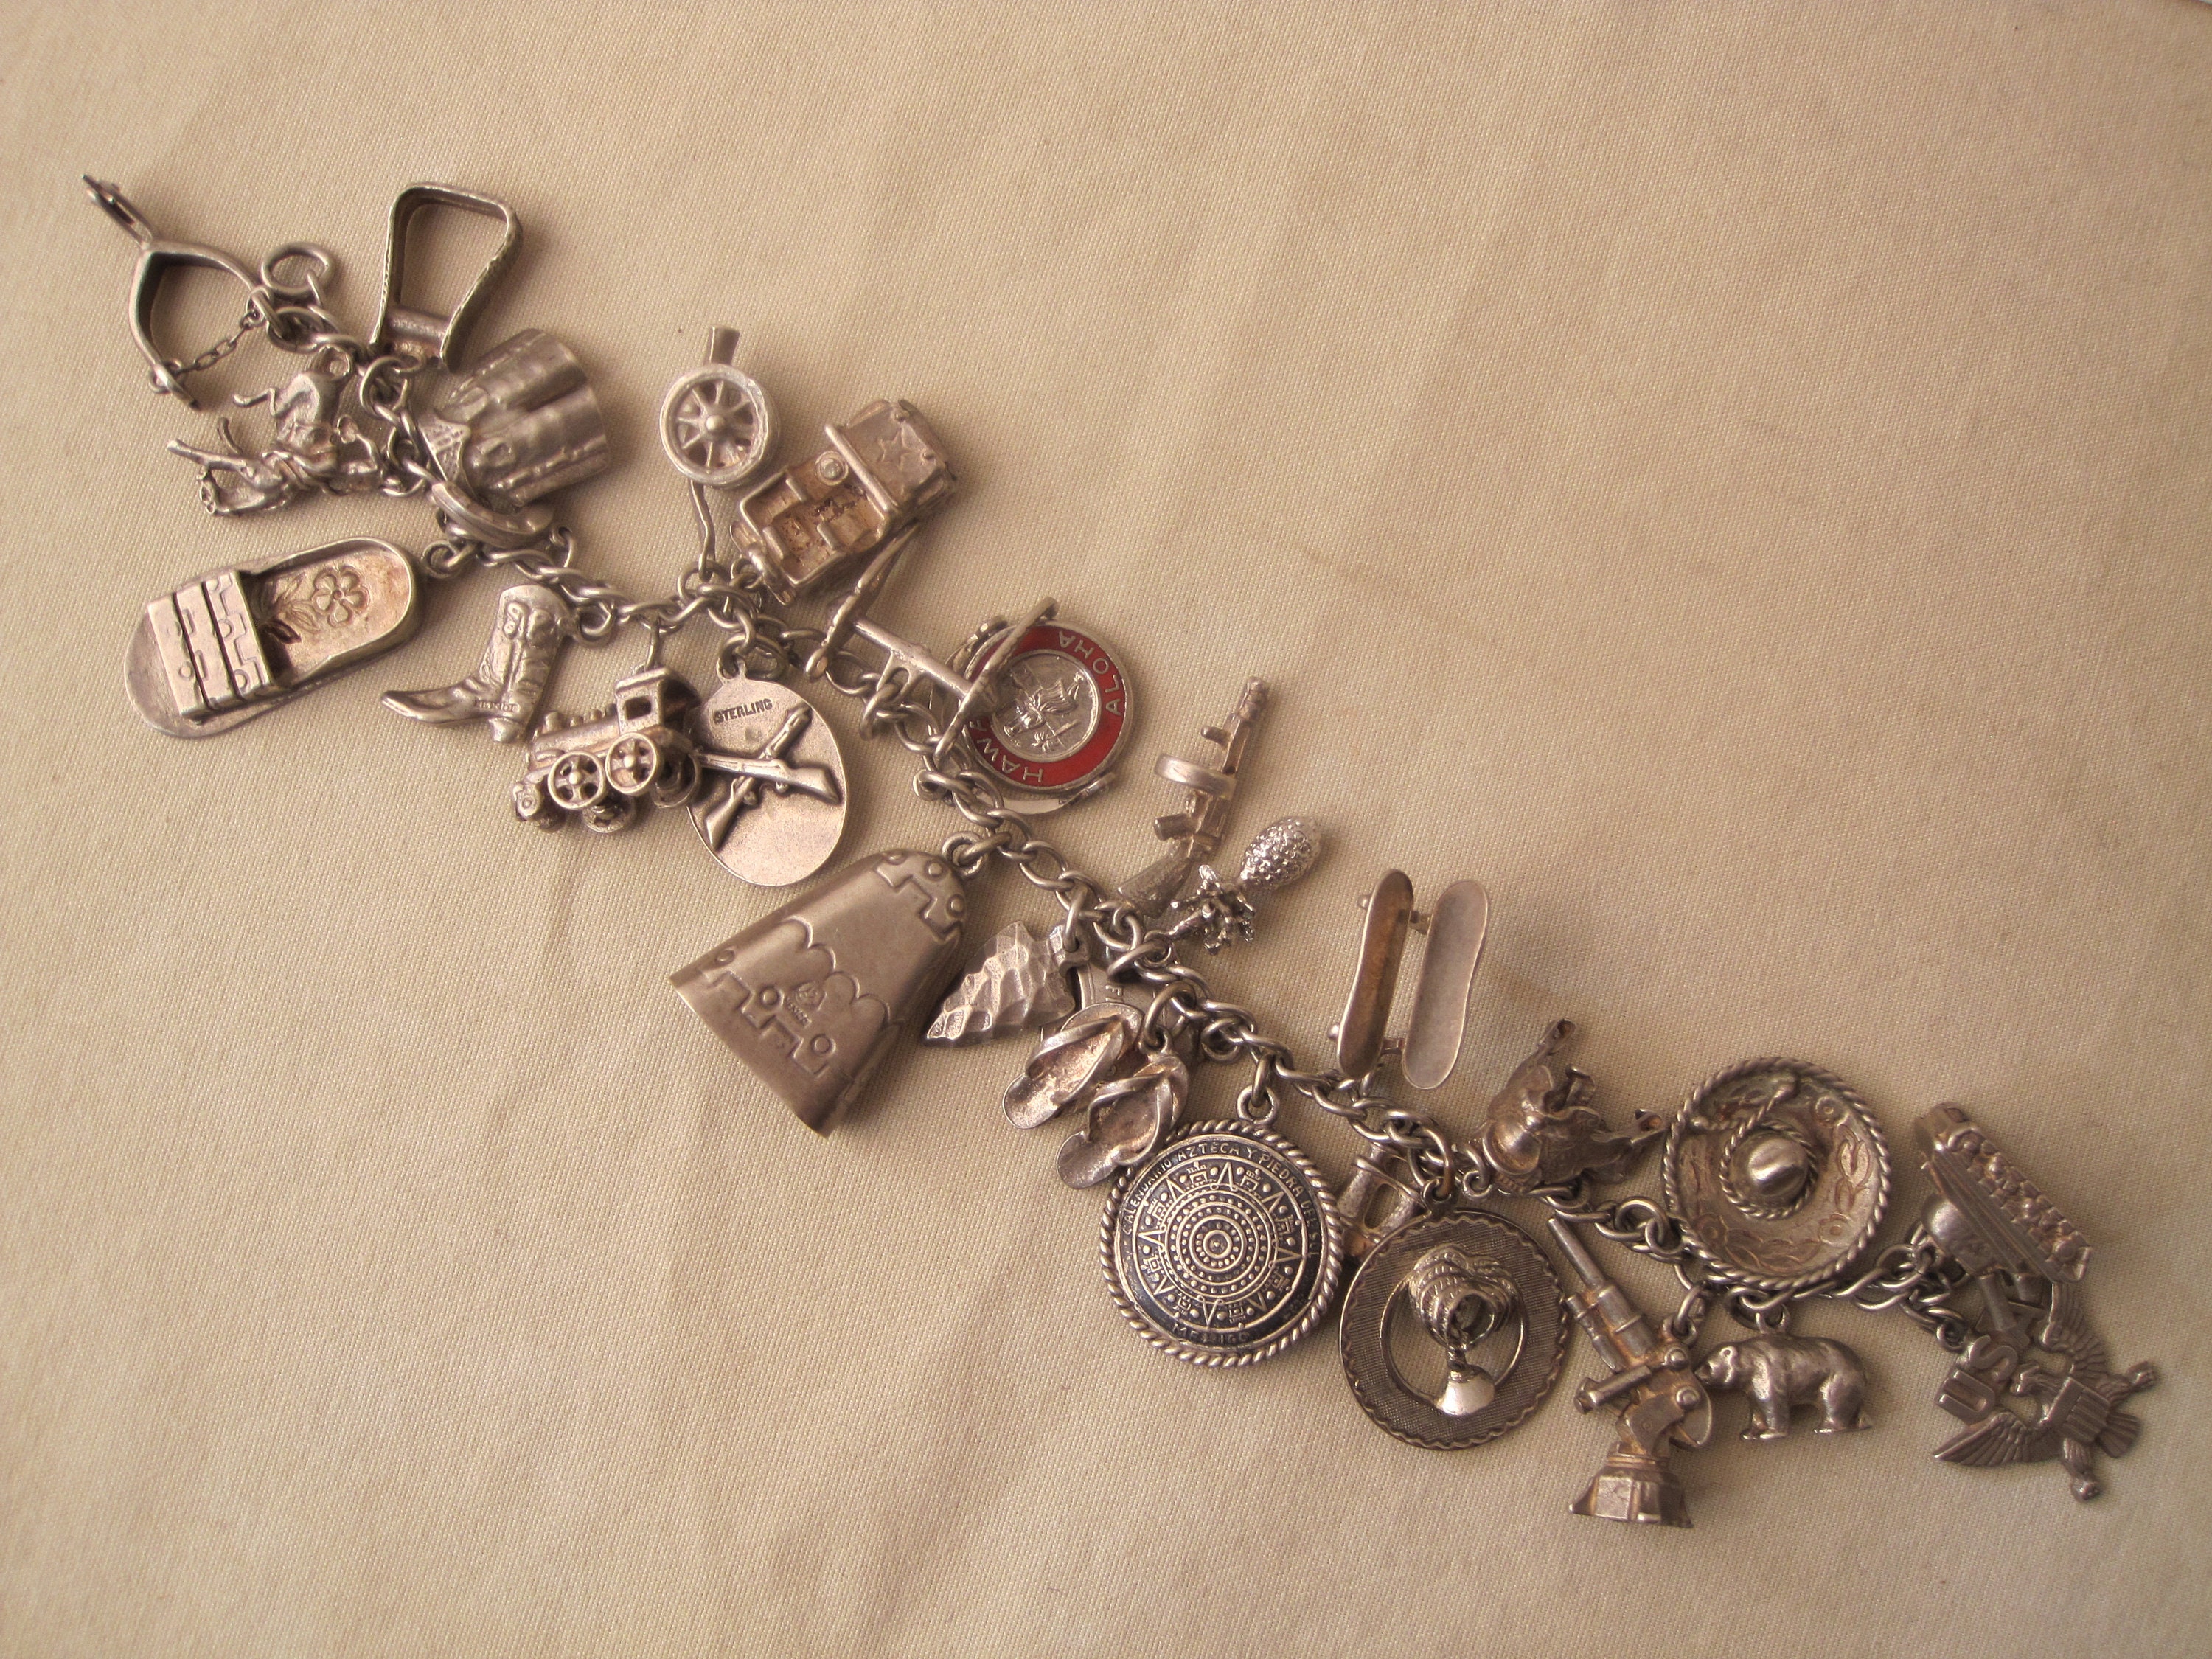  Acxico 50Pcs Antique Silver Wave Charm for Jewelry